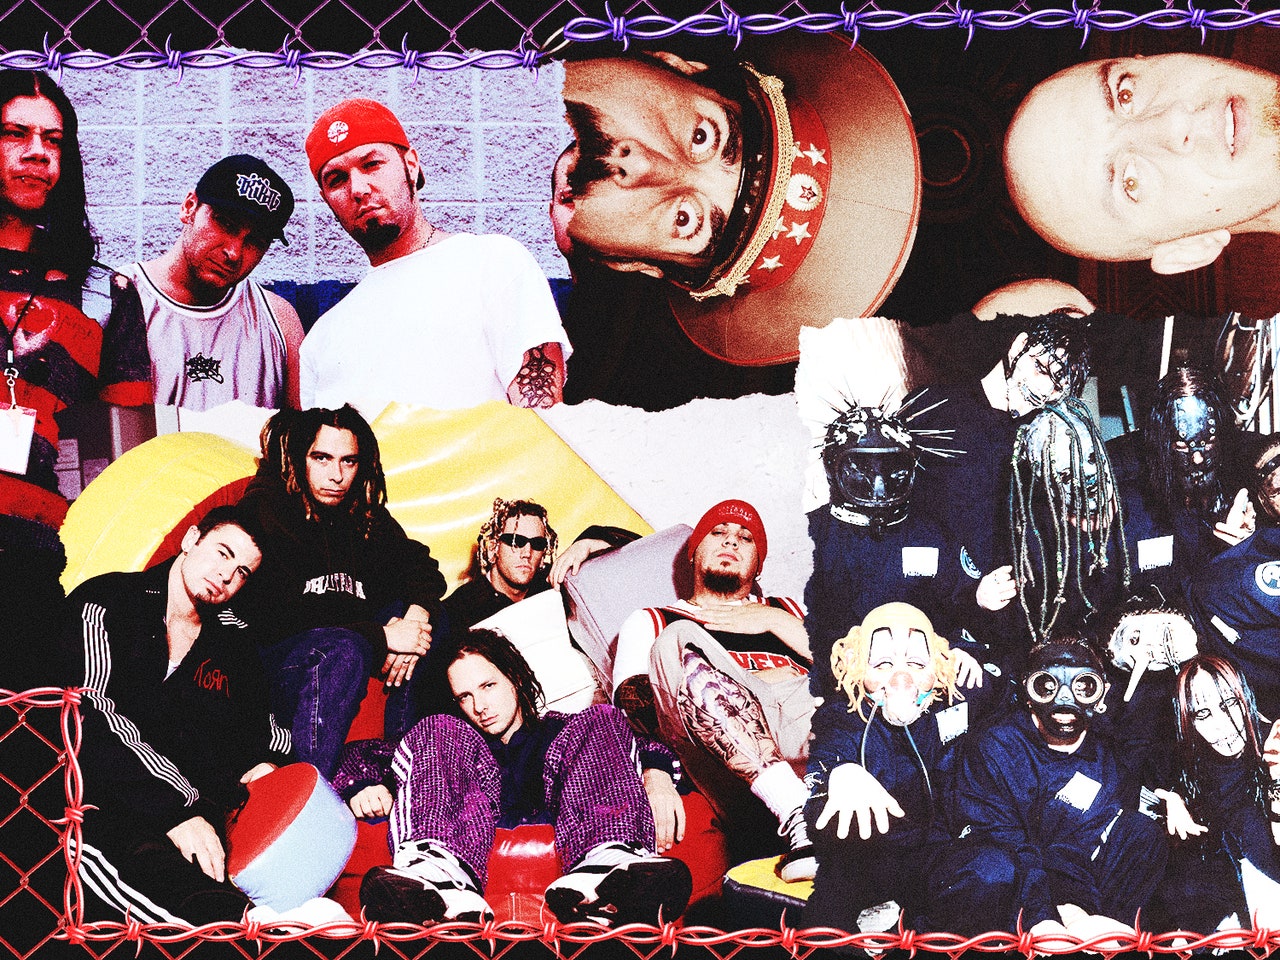 How Did Nu Metal Become the Hottest Thing in Fashion?